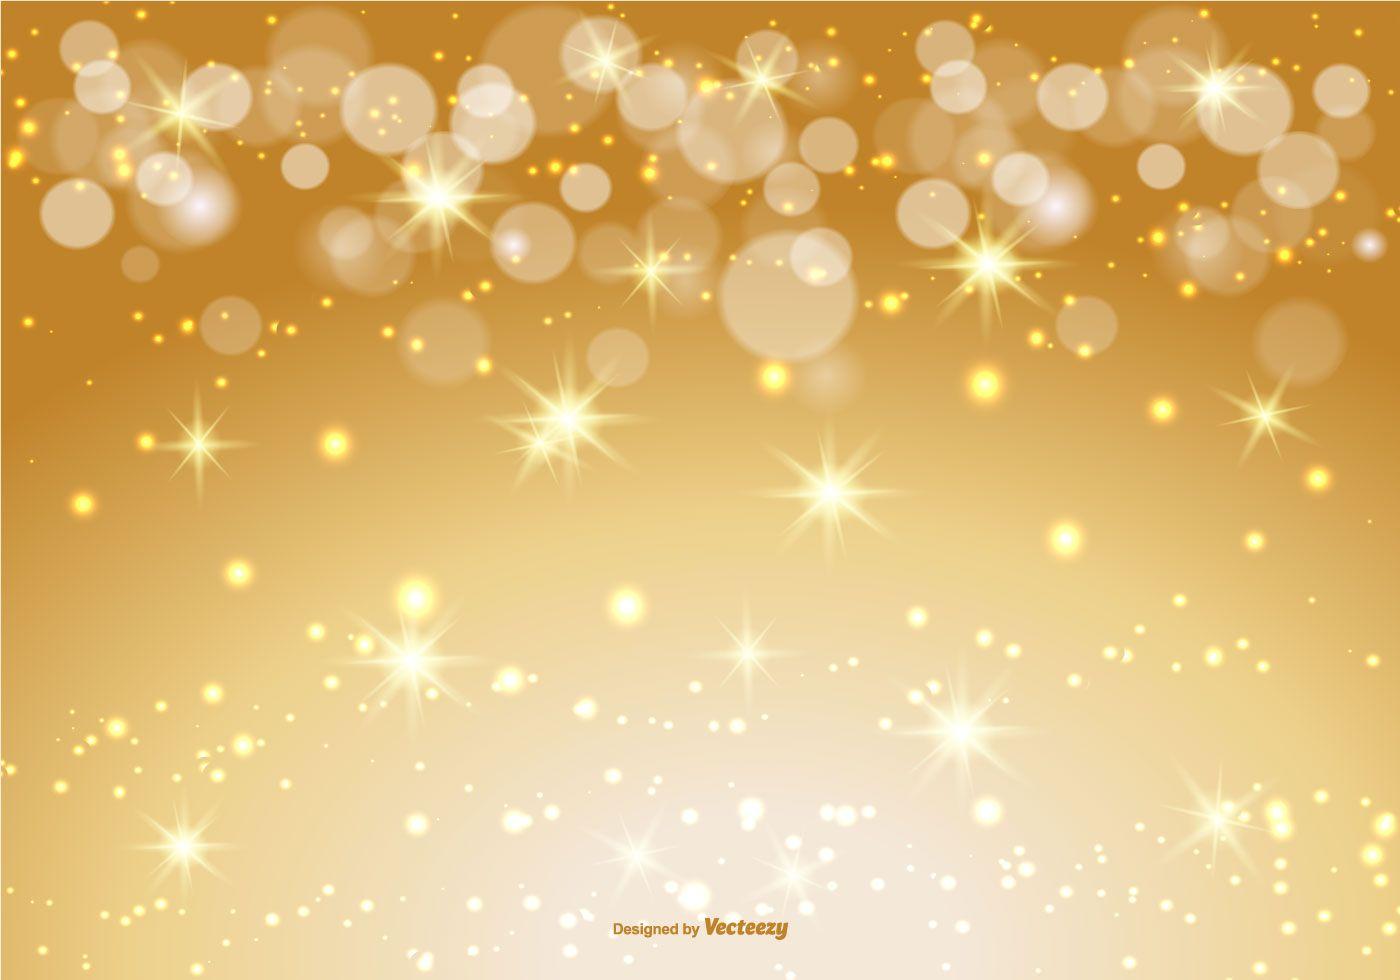 Sparkle Free Vector Art is Here!. Image & Background